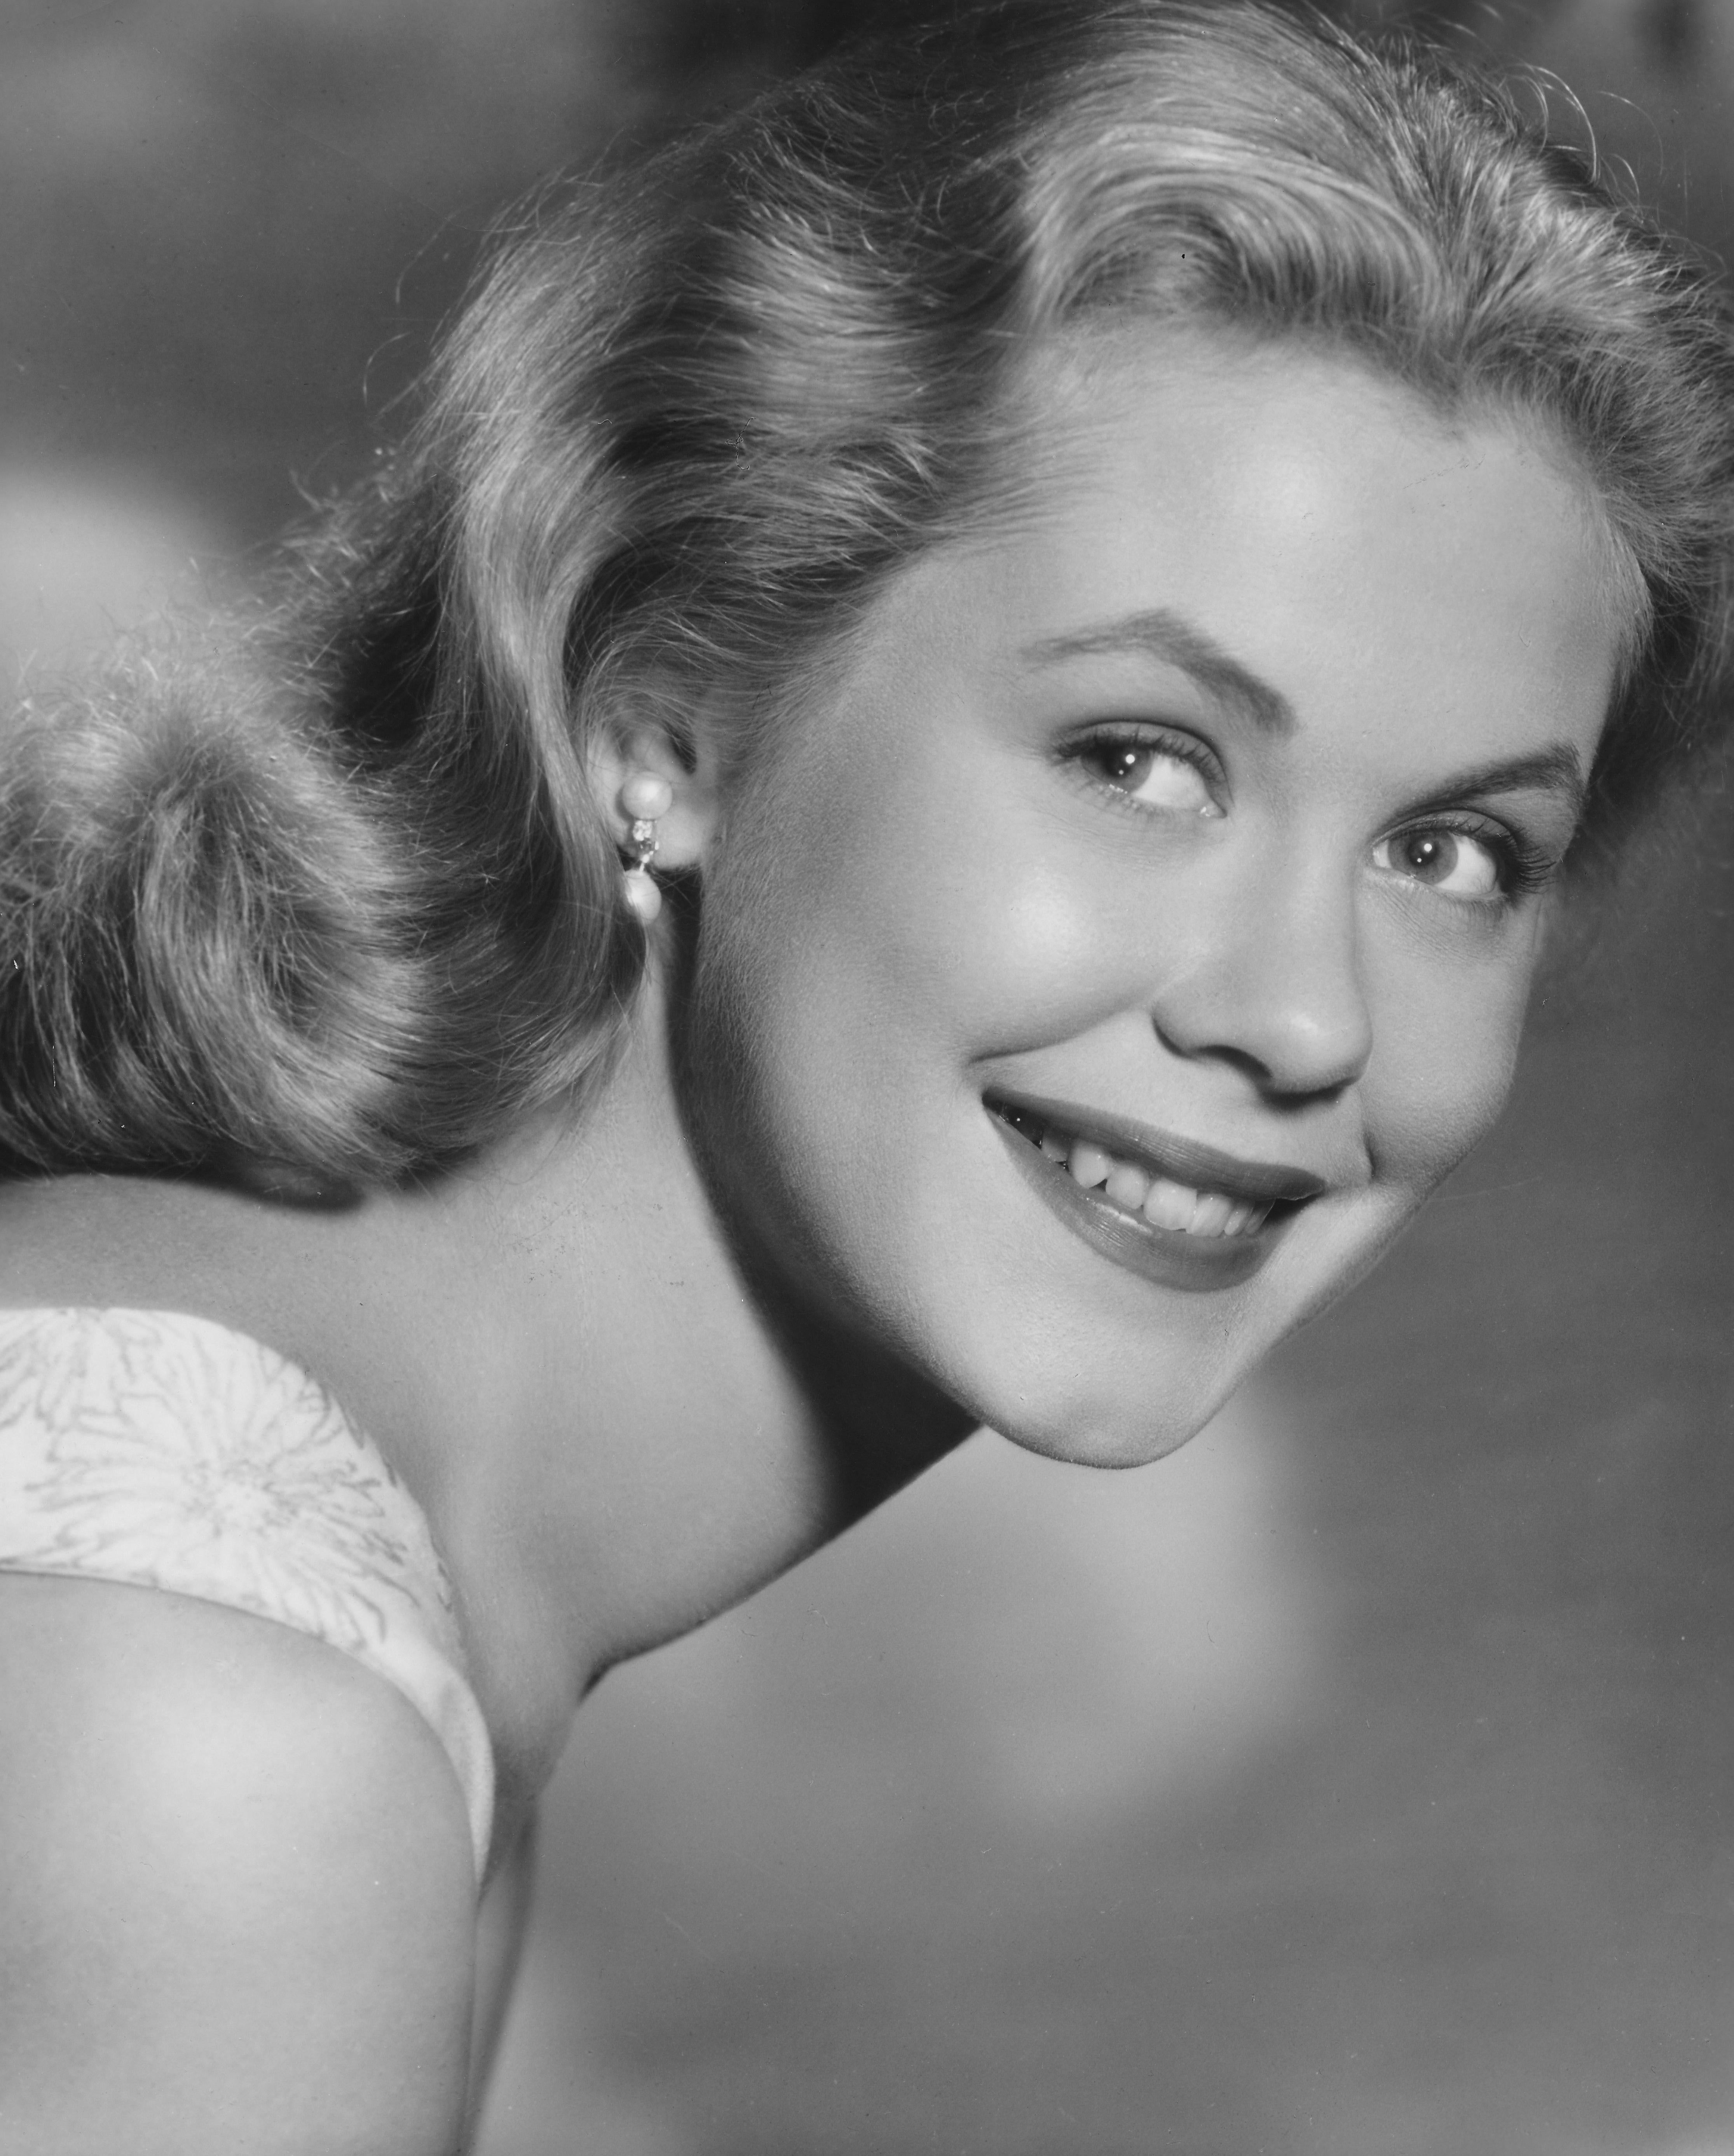 Unknown Portrait Photograph - Elizabeth Montgomery Smiling in "Bewitched" Fine Art Print